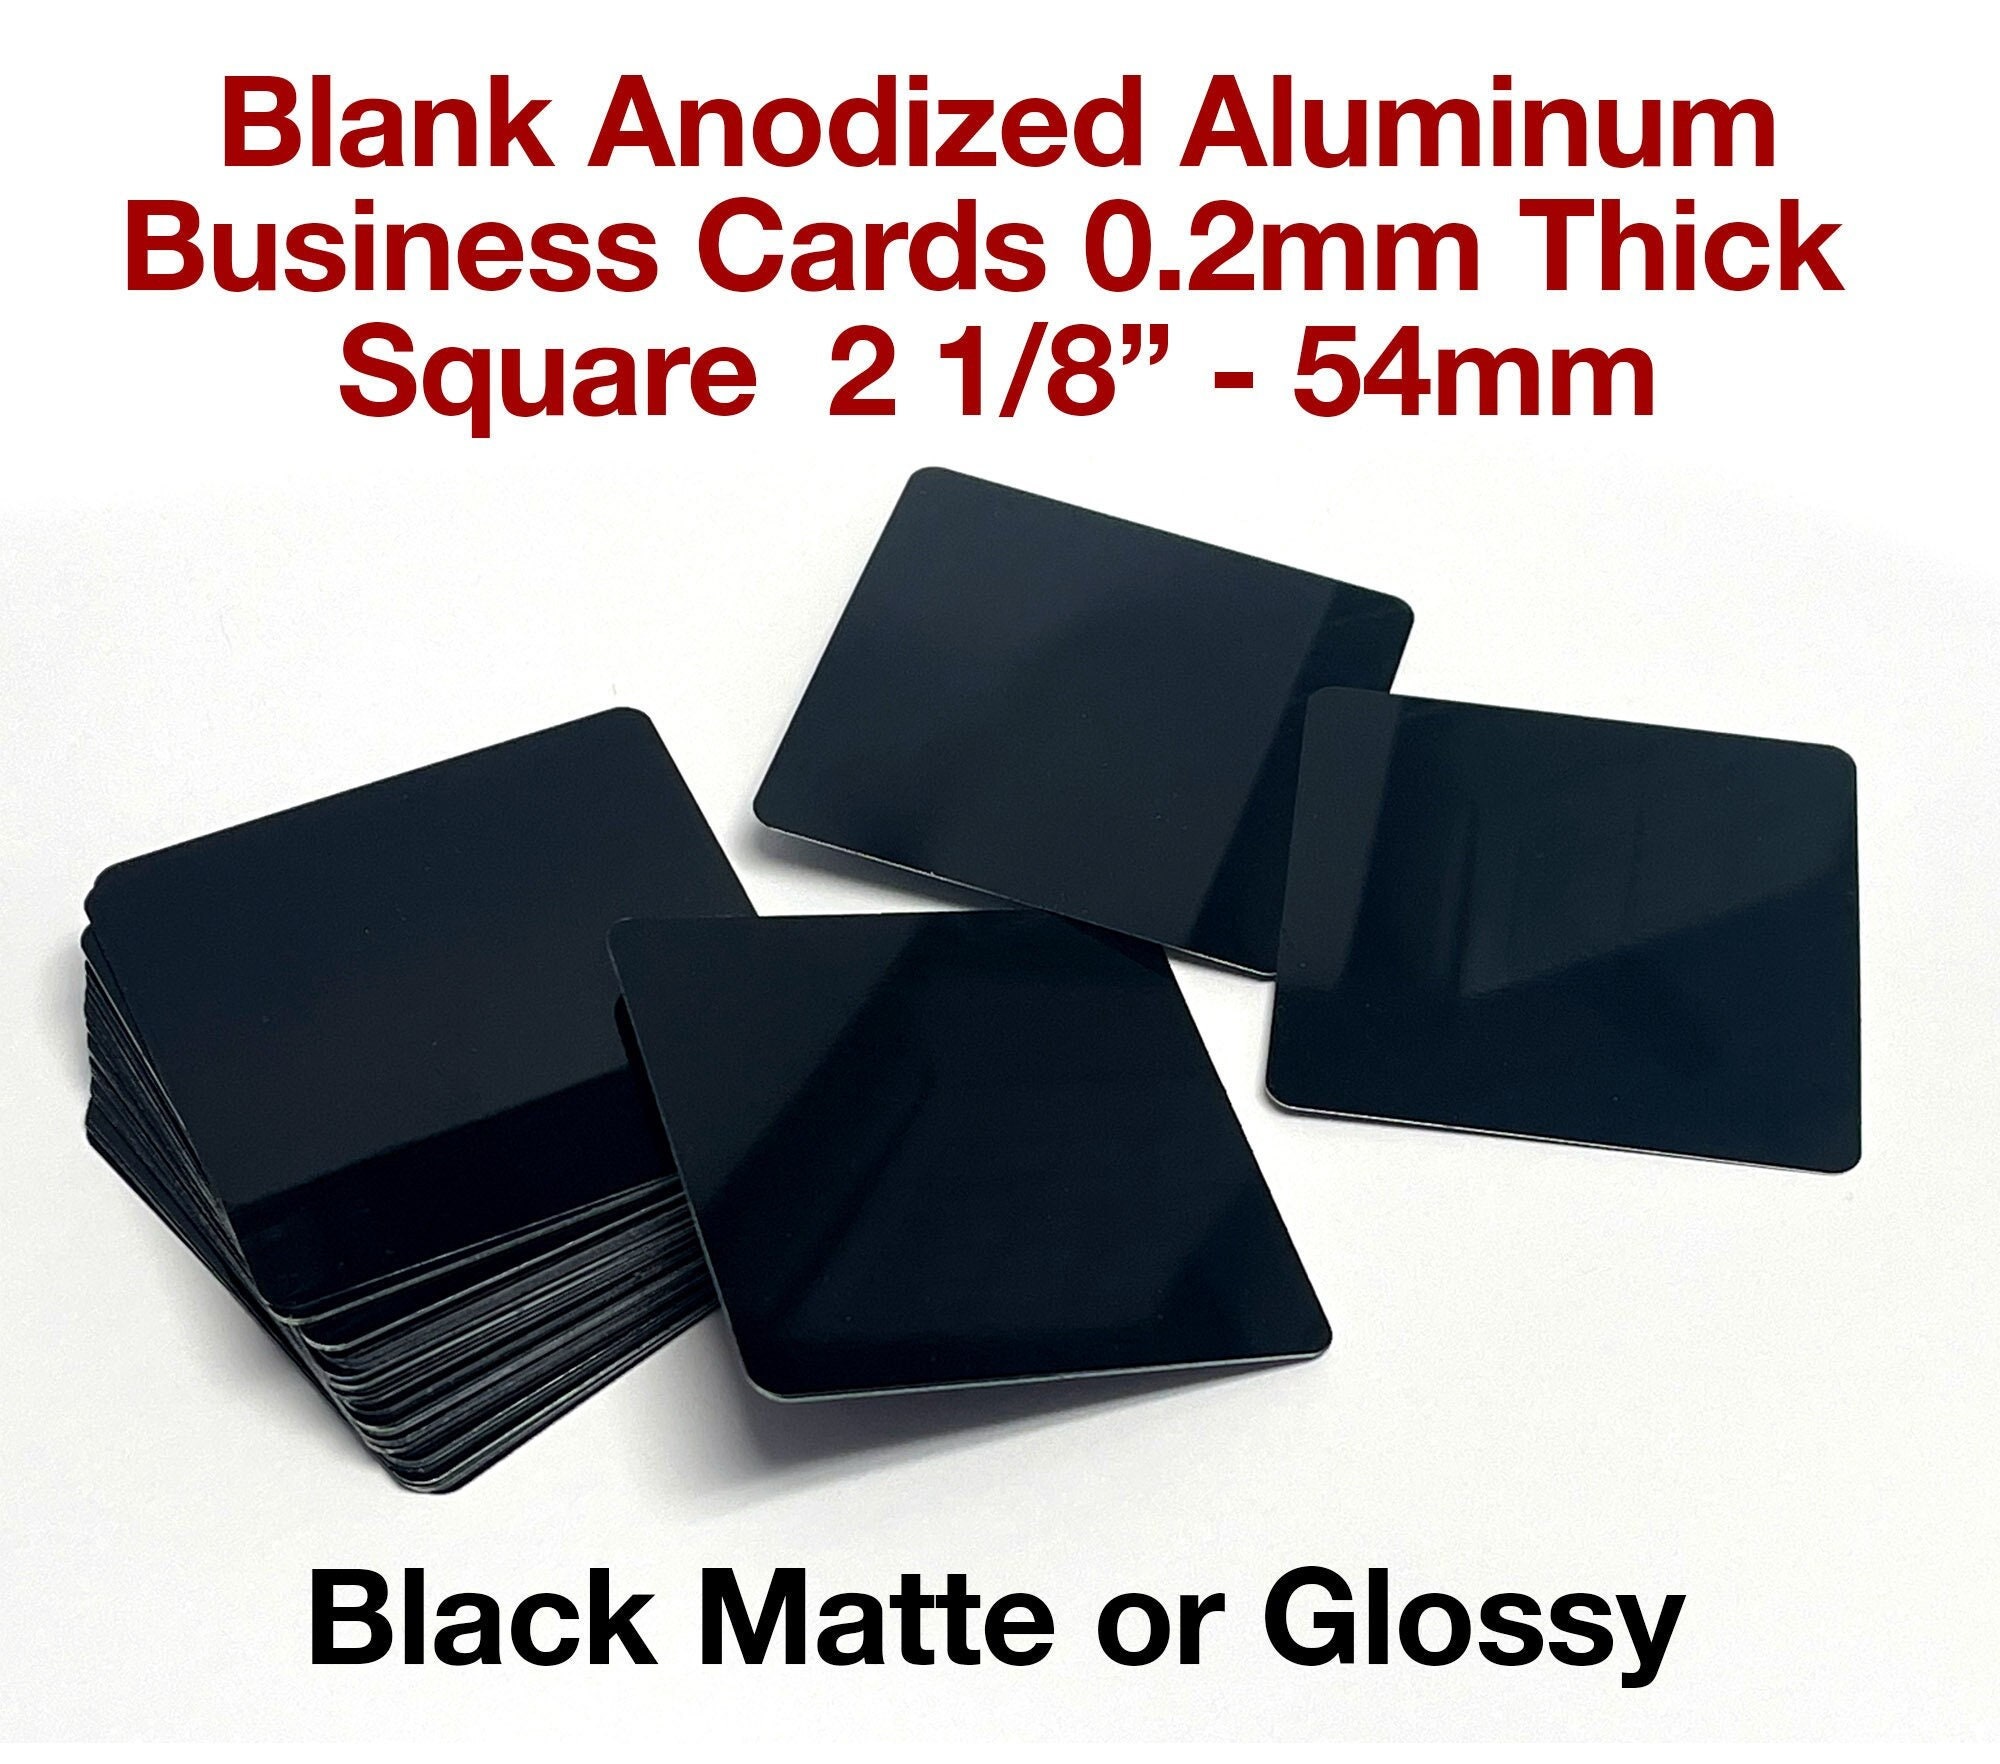 Thick Black Anodized Aluminum Business Card Blanks 100 Pack for Metal Work  and Laser Engraving or Sublimation 3.4 X 2.1 X 0.45mm Thick 